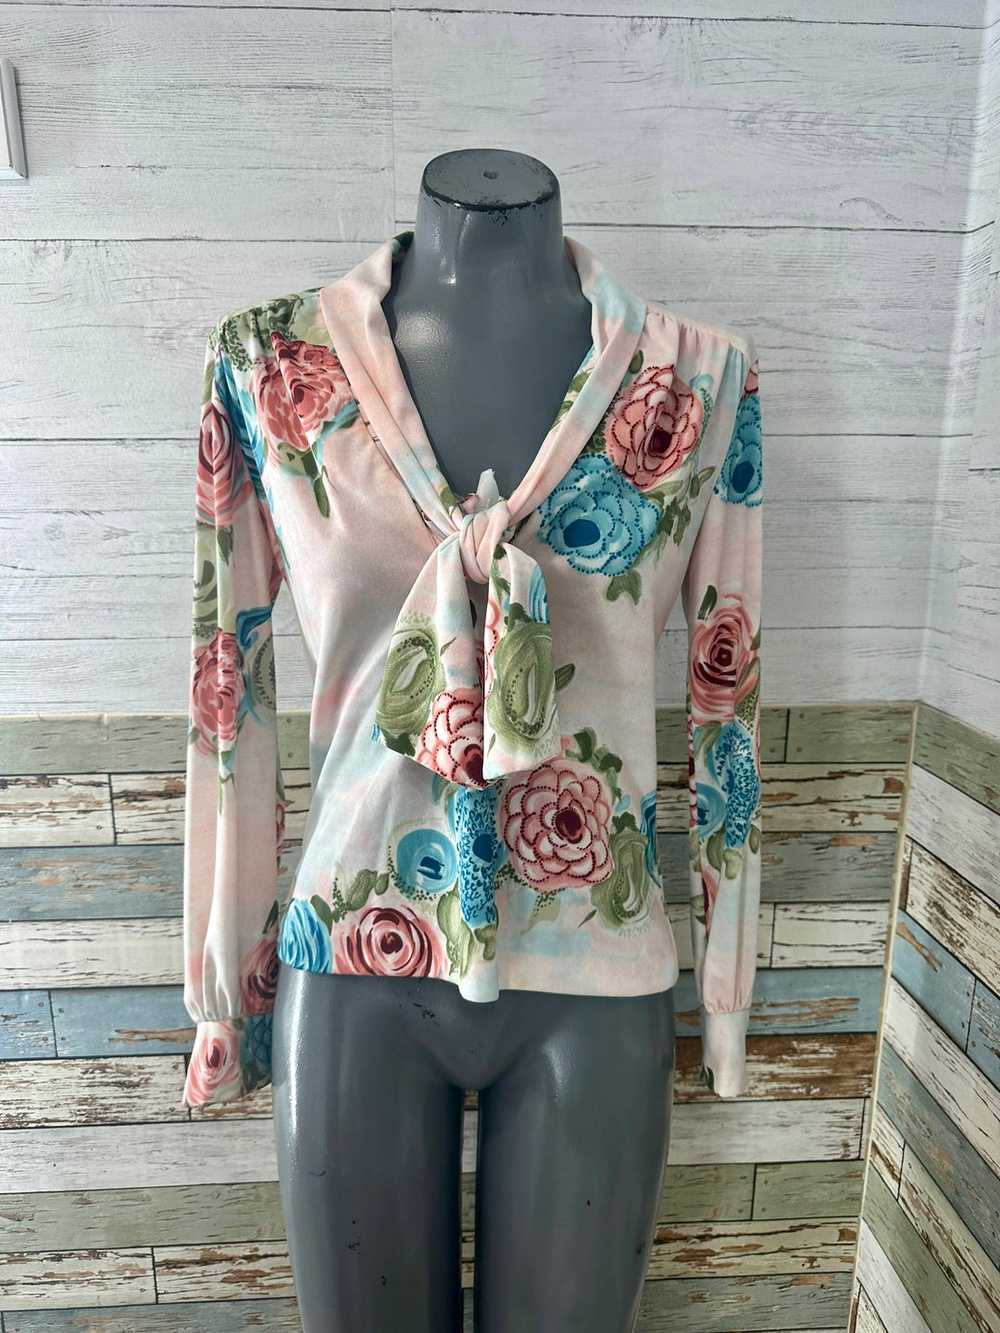 70’s Pink Multicolor Flower Print Blouse With Bow - image 1